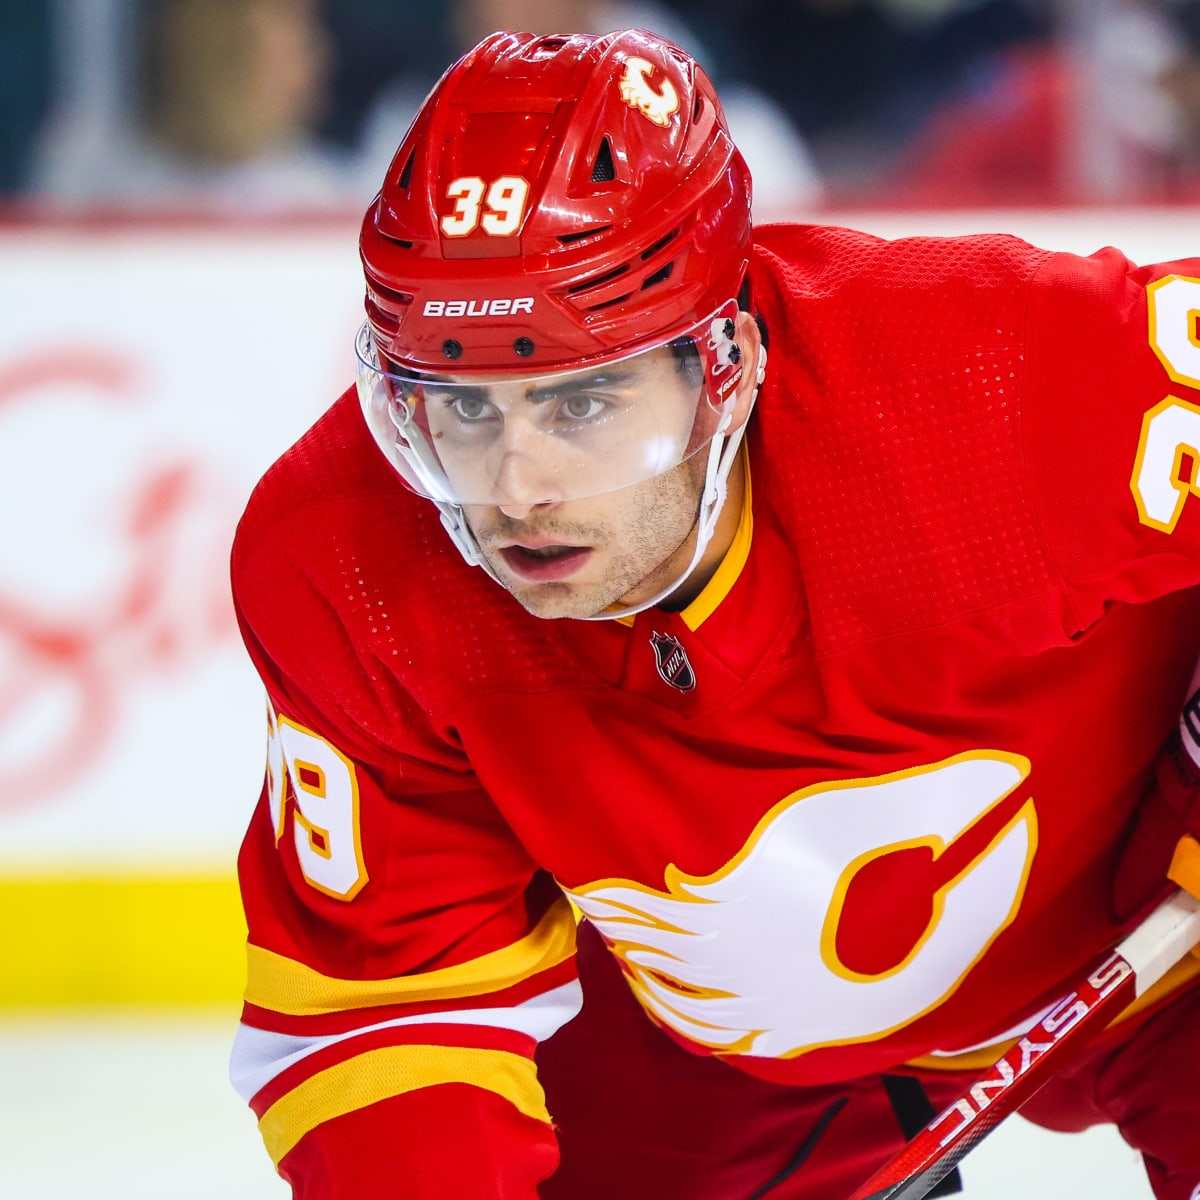 How various public analytics models view the Calgary Flames